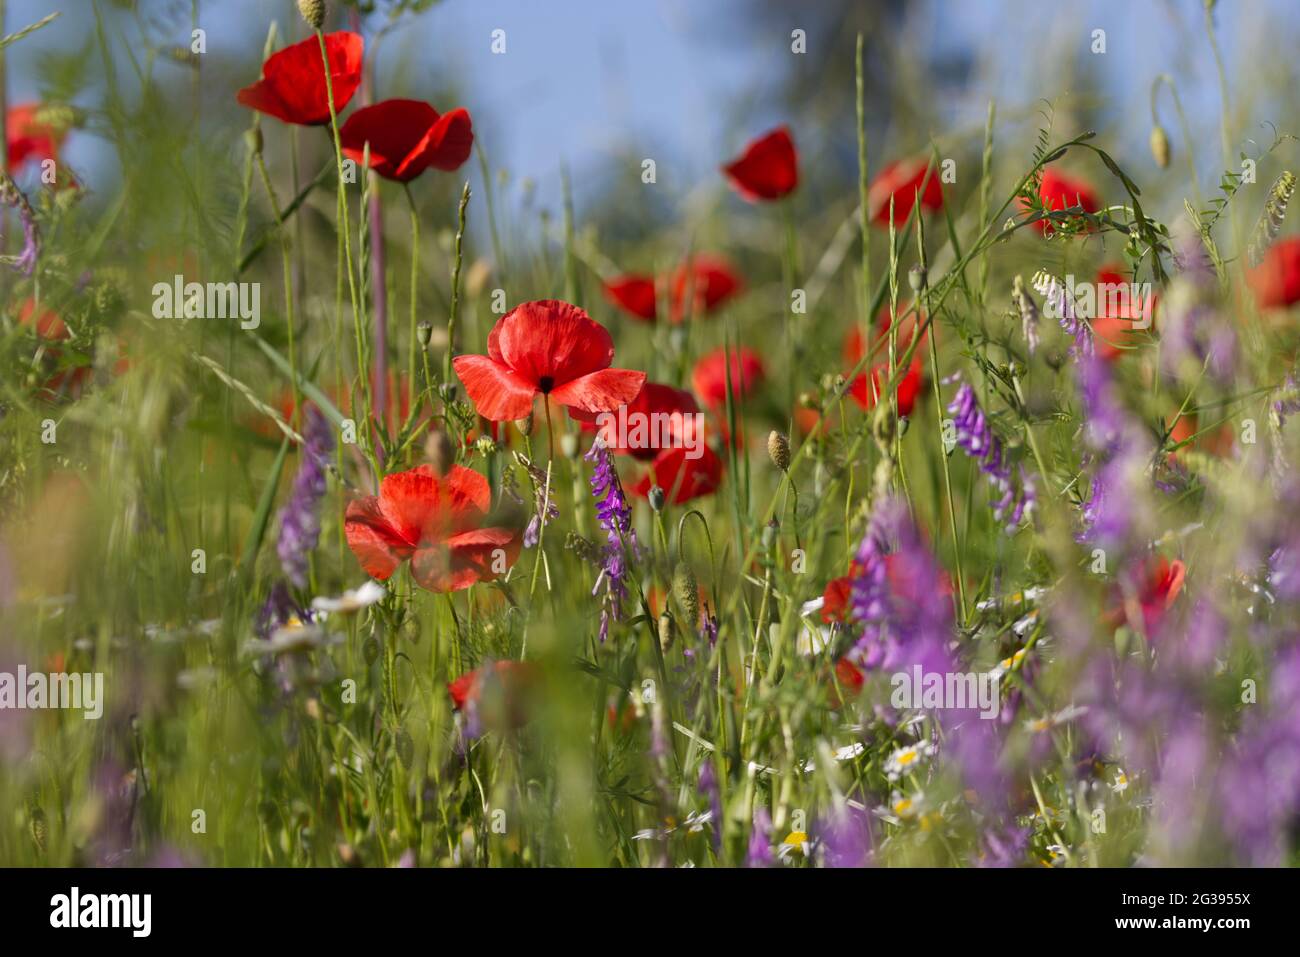 close up of a red poppies field Stock Photo